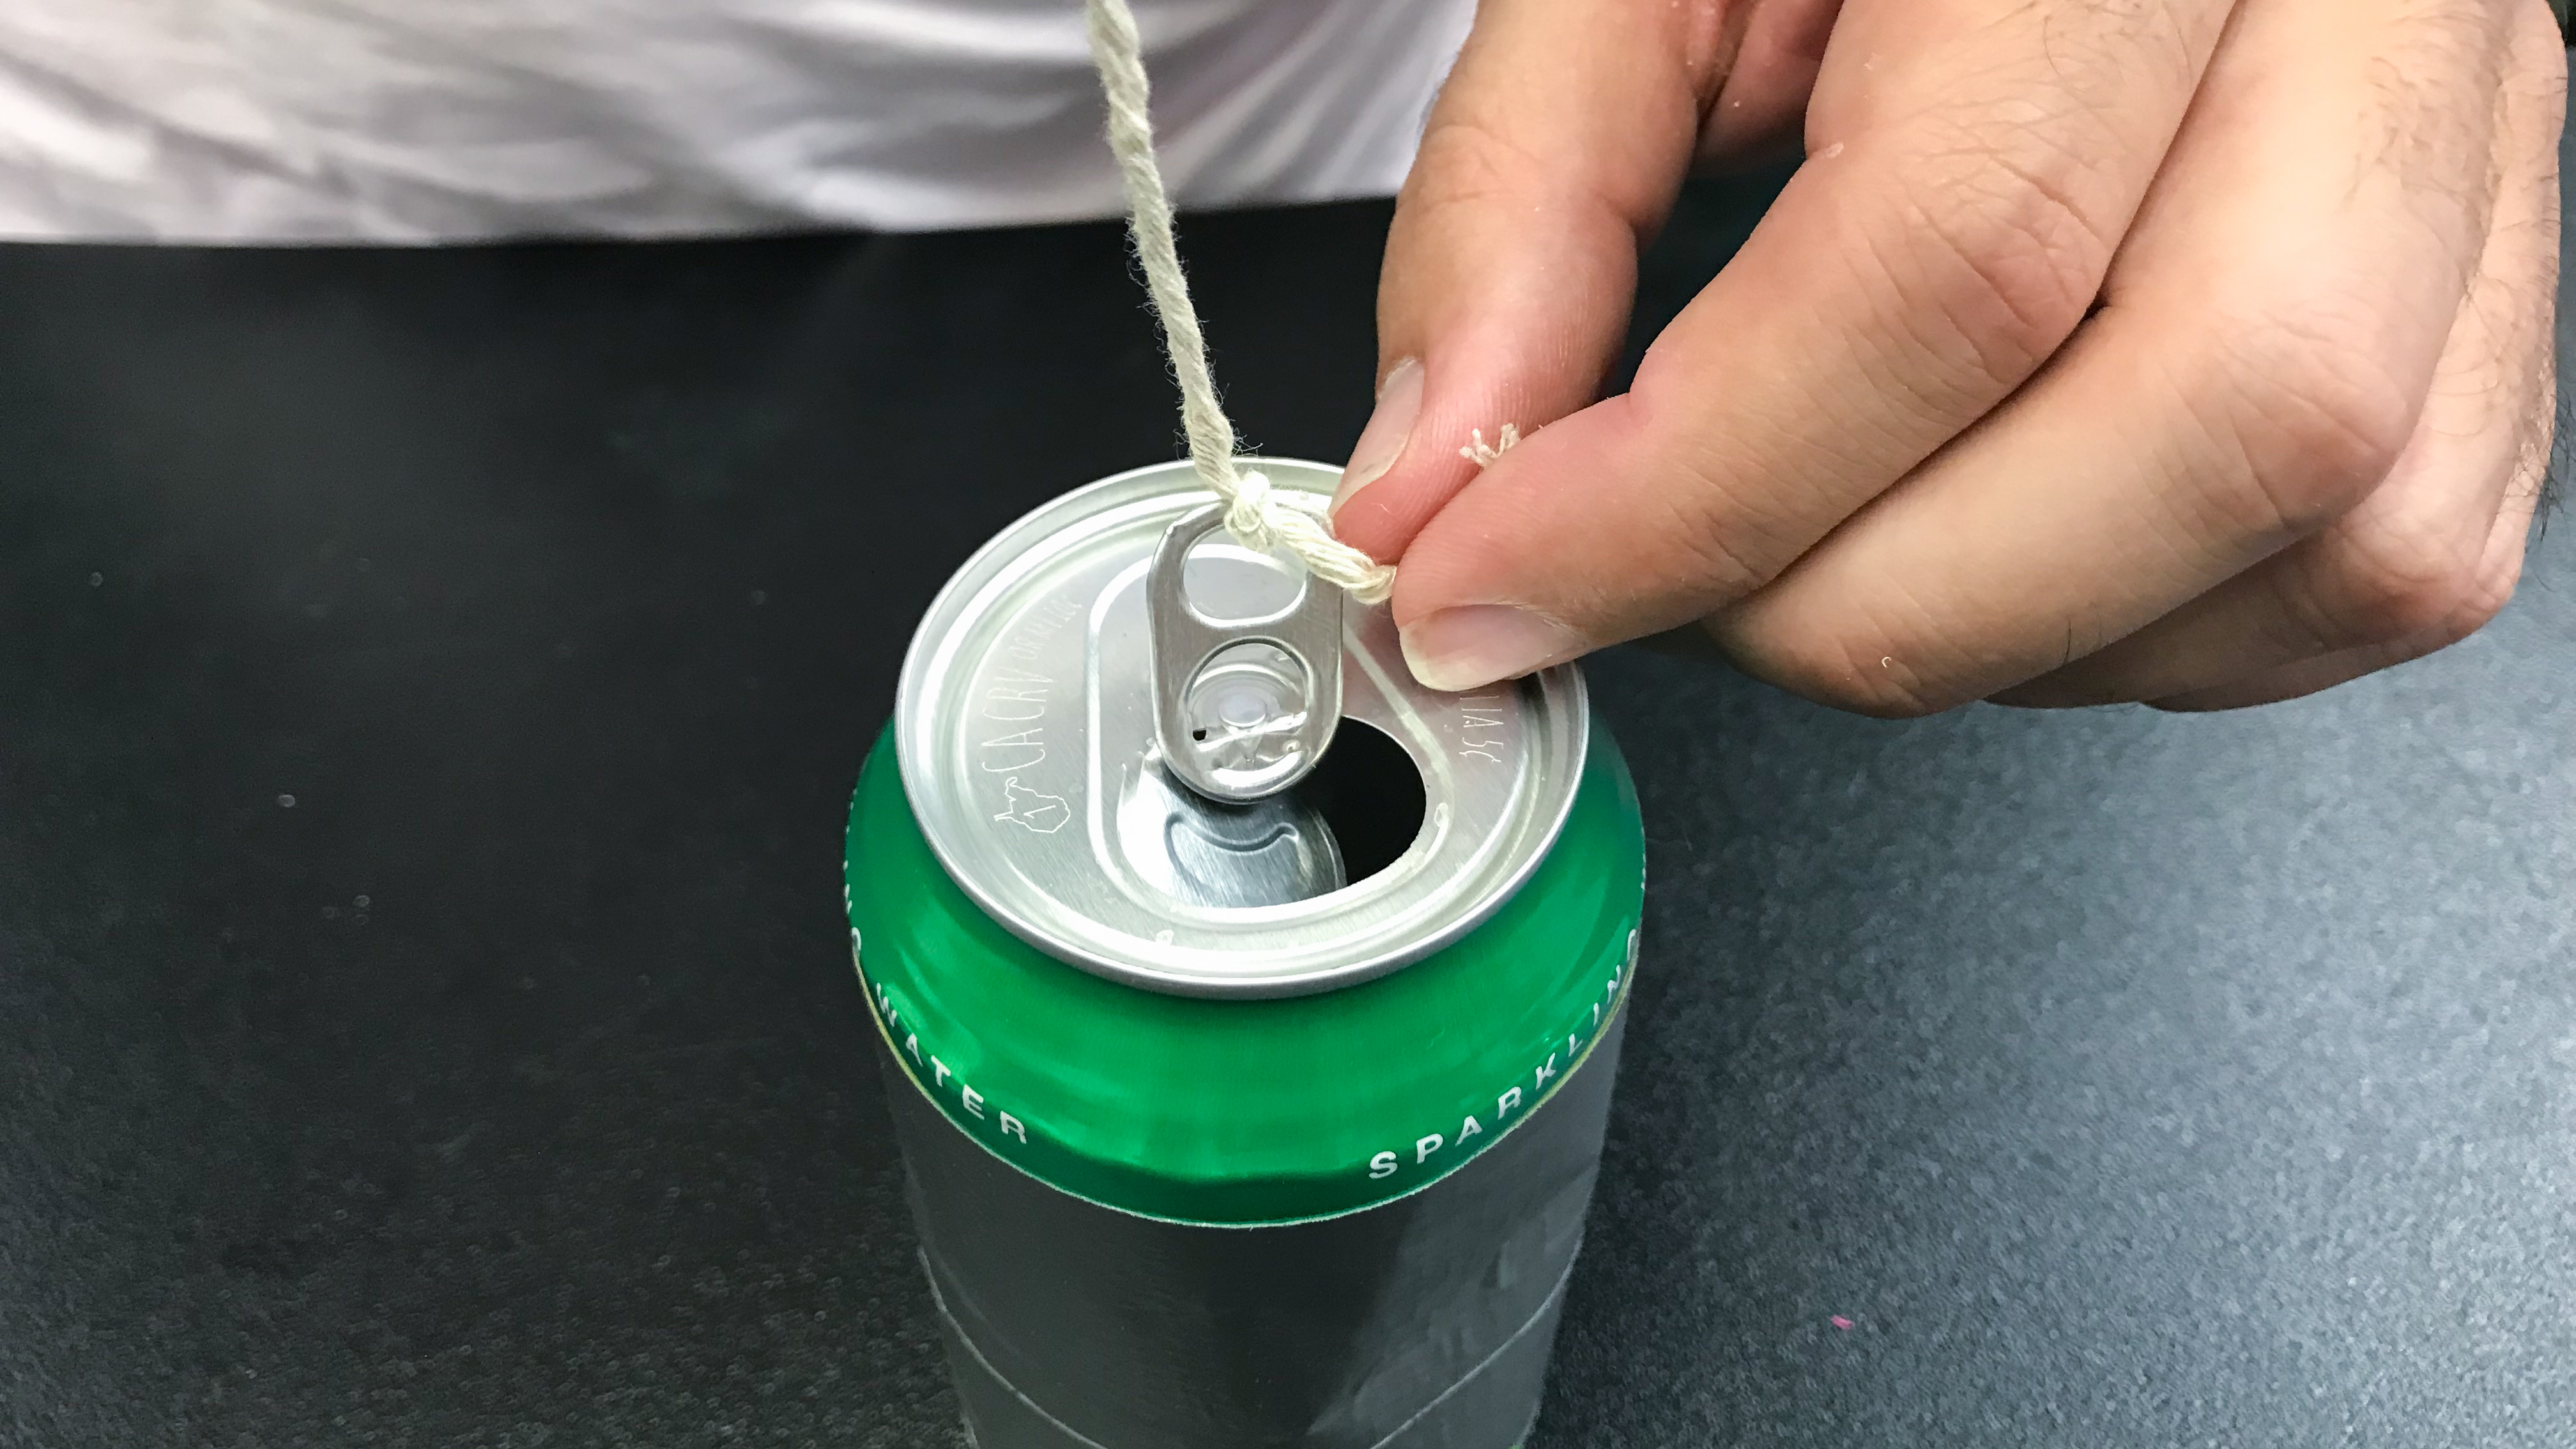 Are Tin Cans the Same as Aluminum Cans?